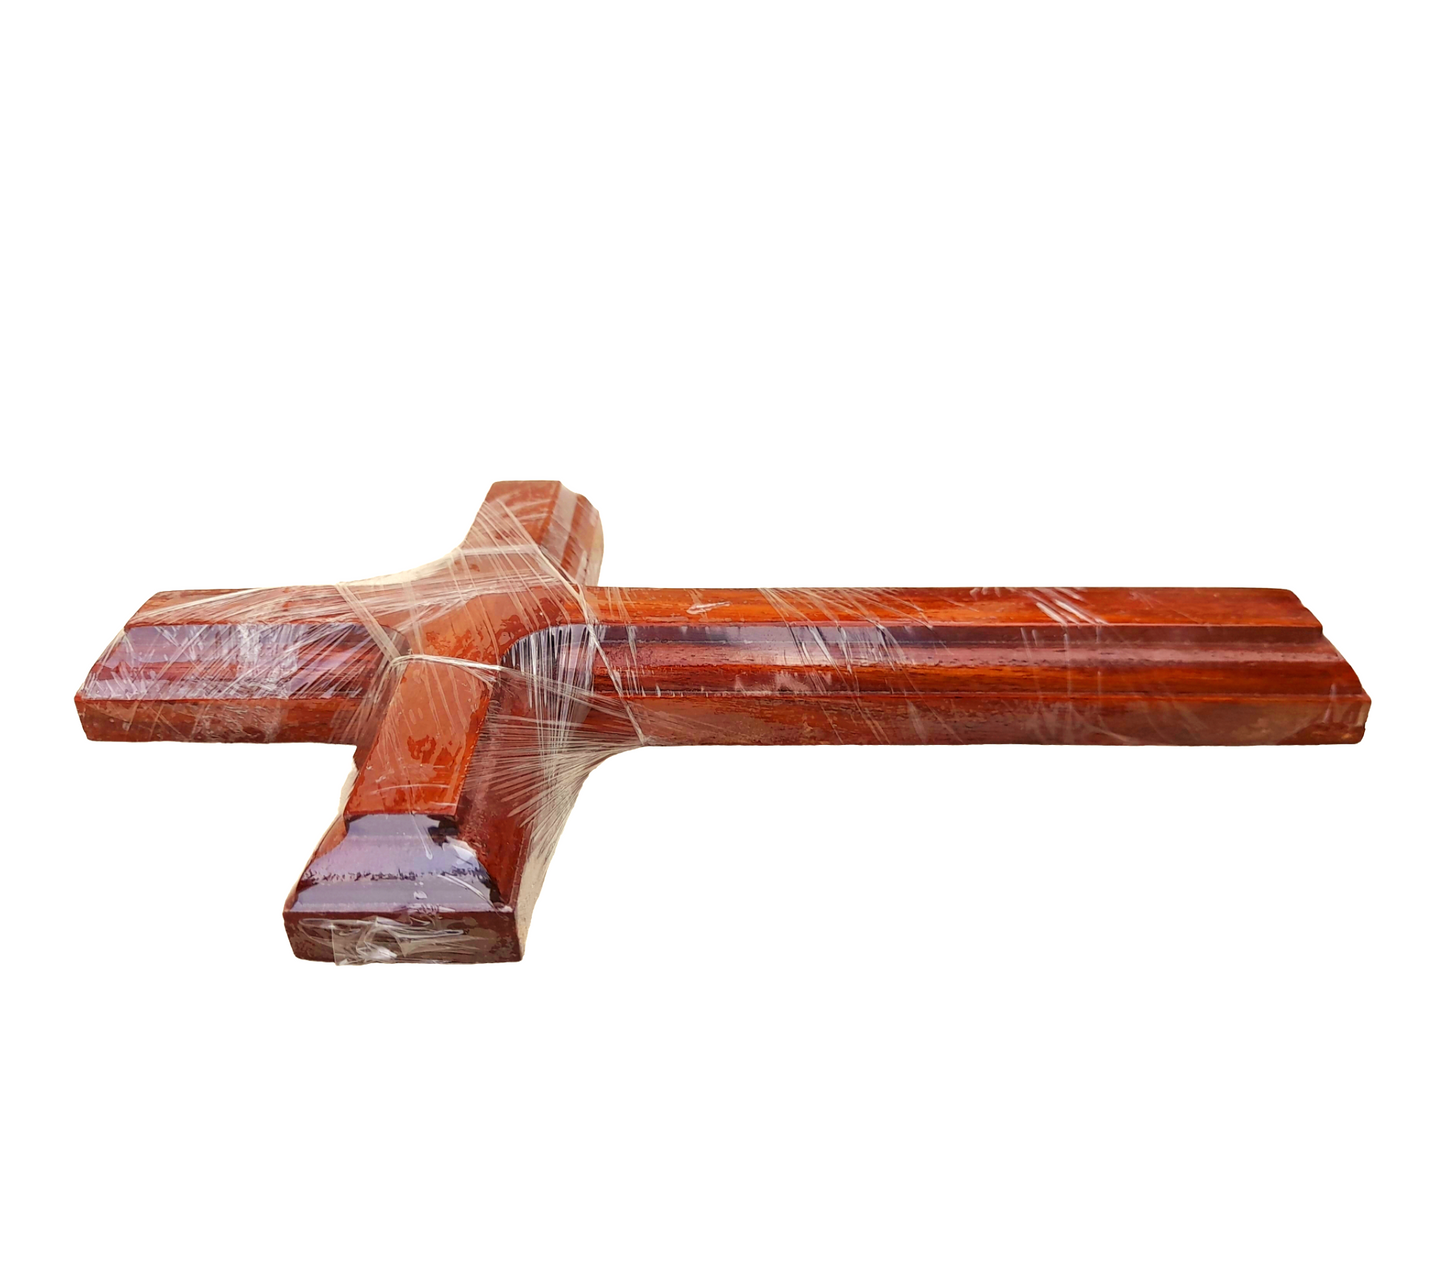 Jesus Christ Cross Wooden Crucifix for Wall